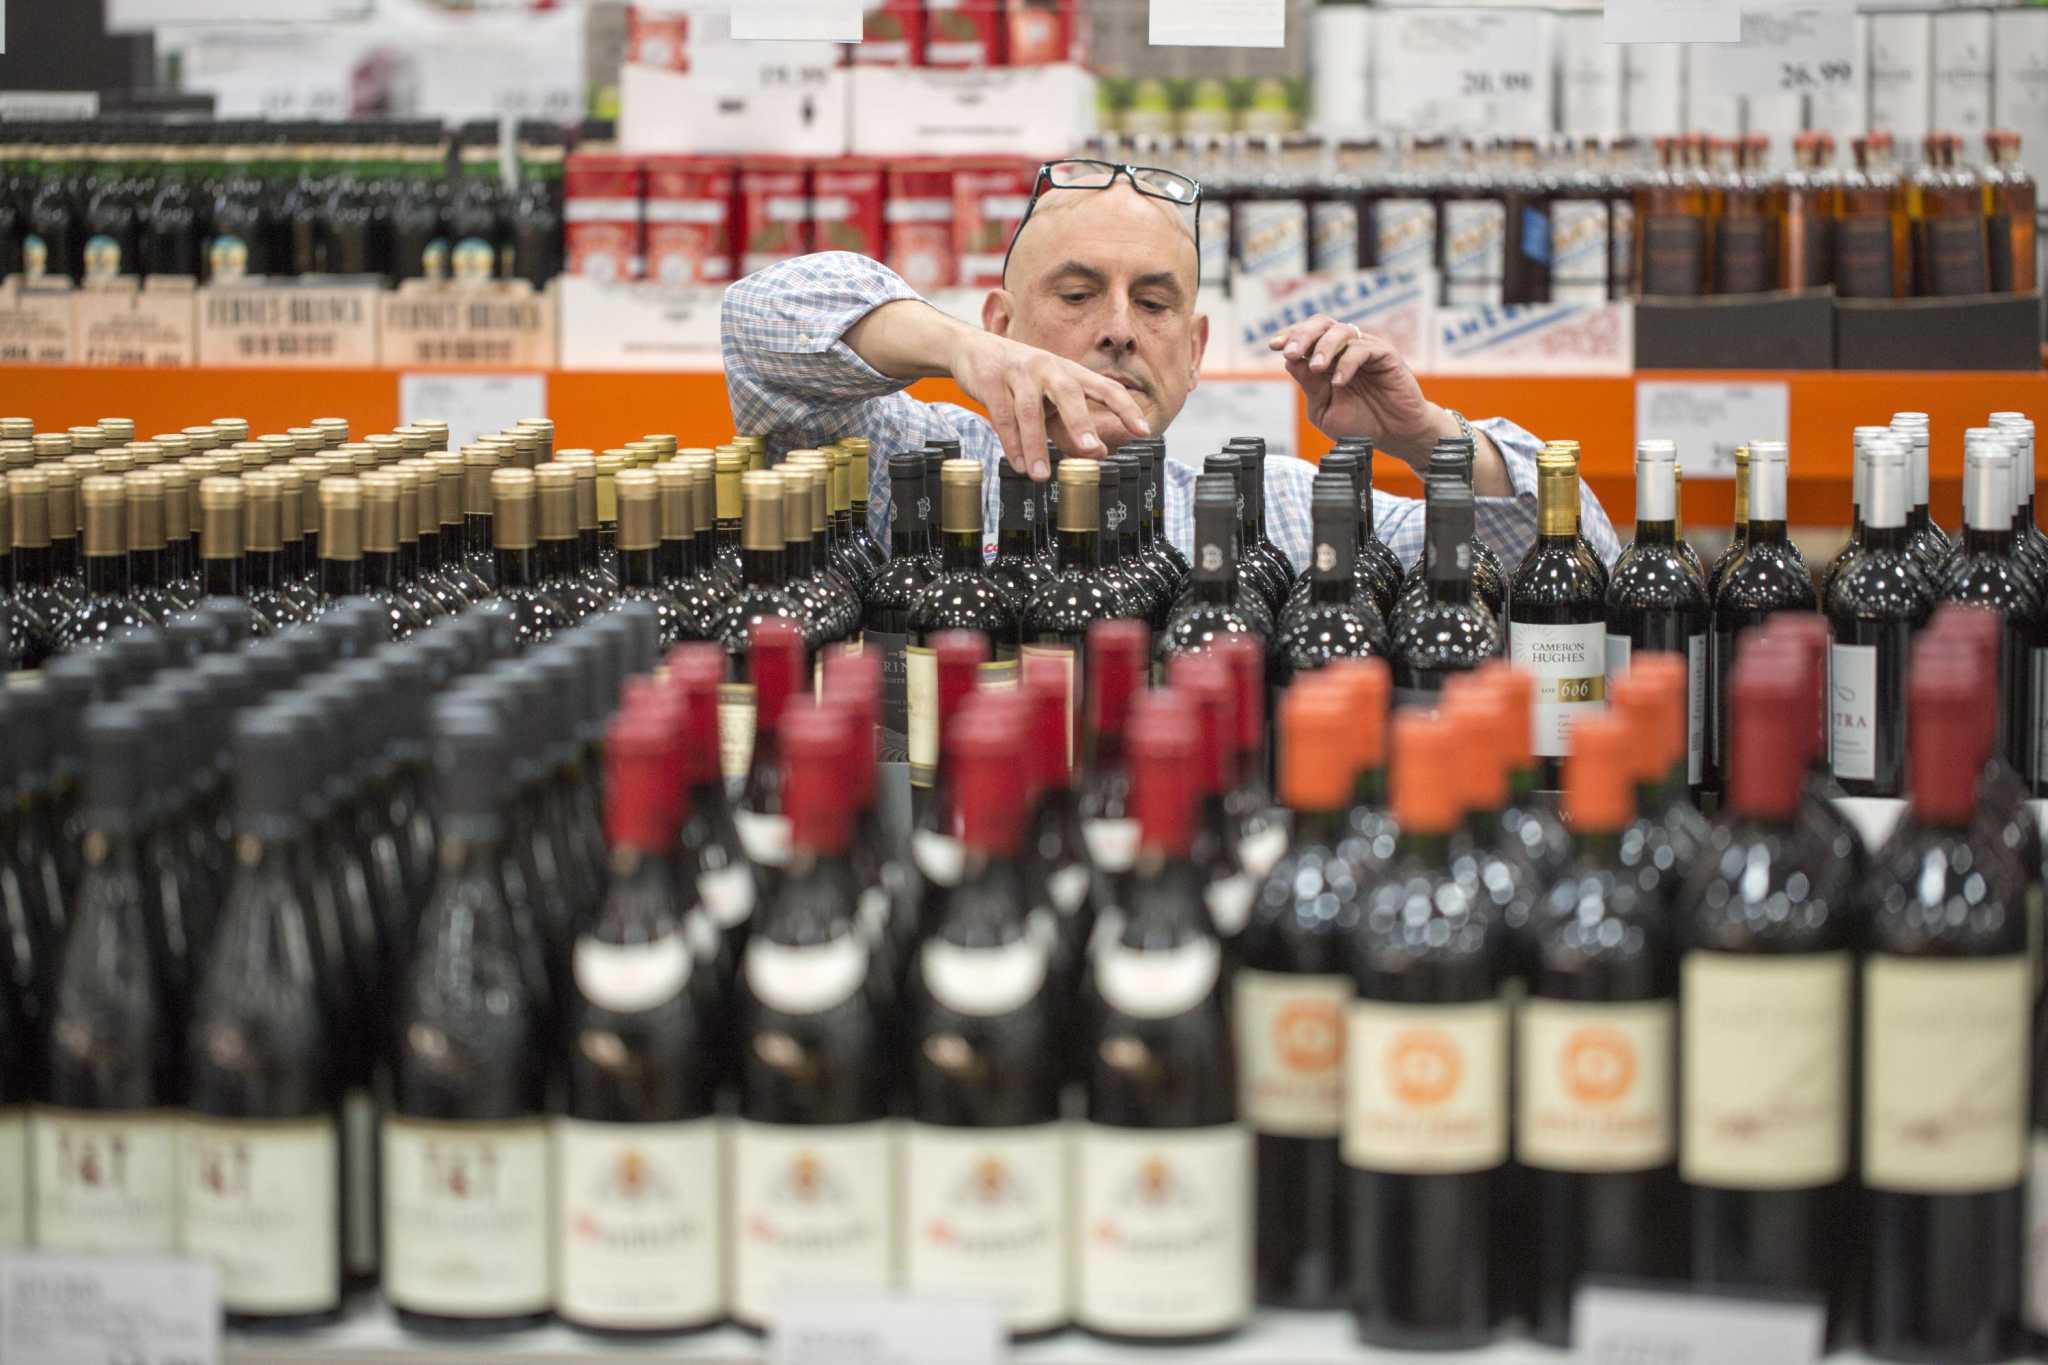 Best Costco Wine Holiday Gifts